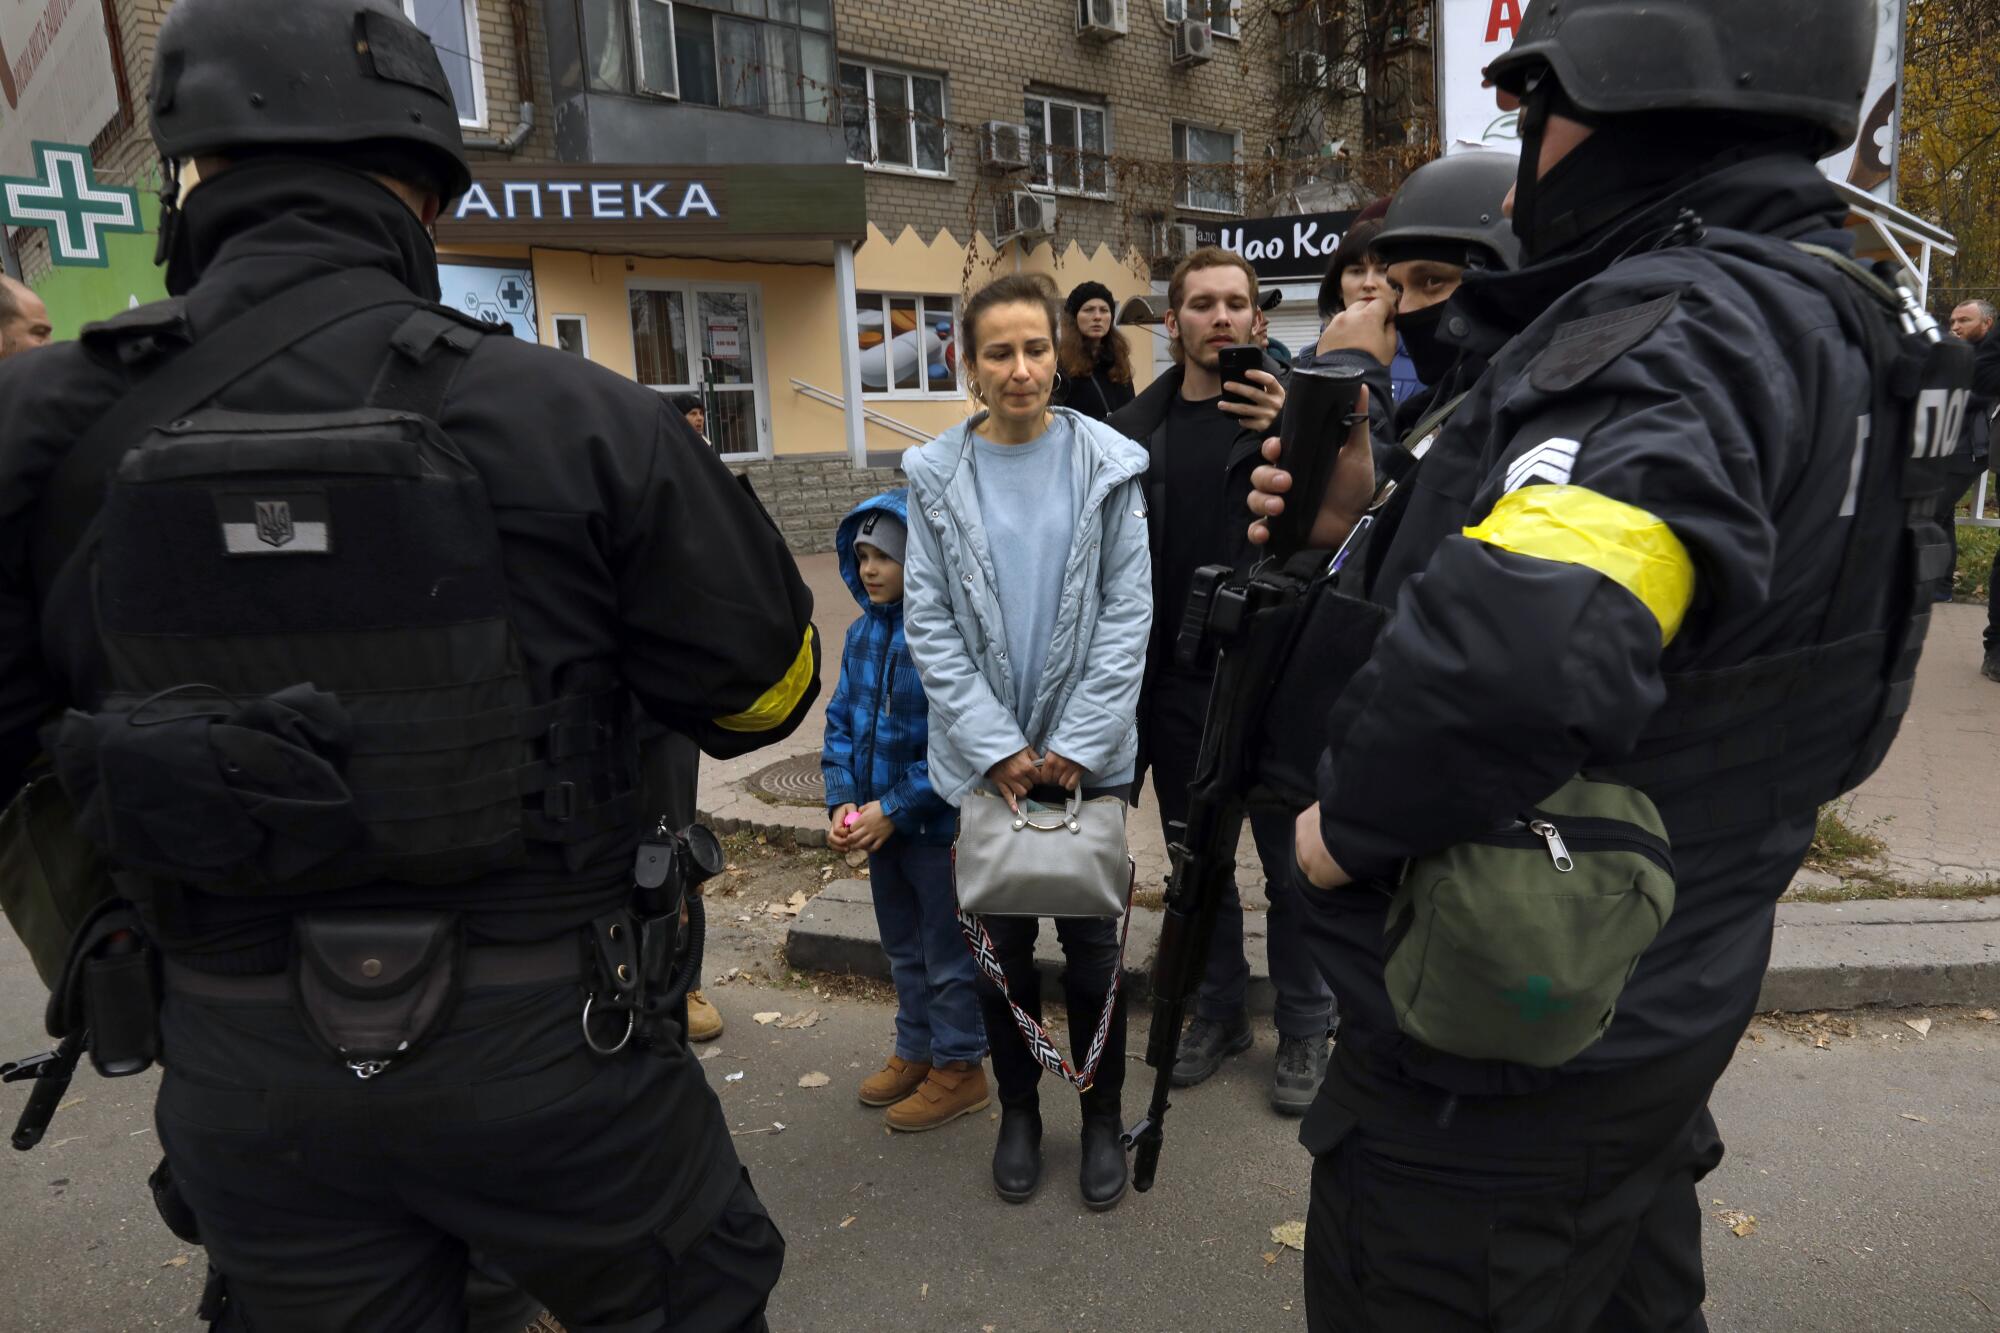 A woman in a light blue jacket and top and holding a purse is surrounded by men in helmets and dark uniforms on a street